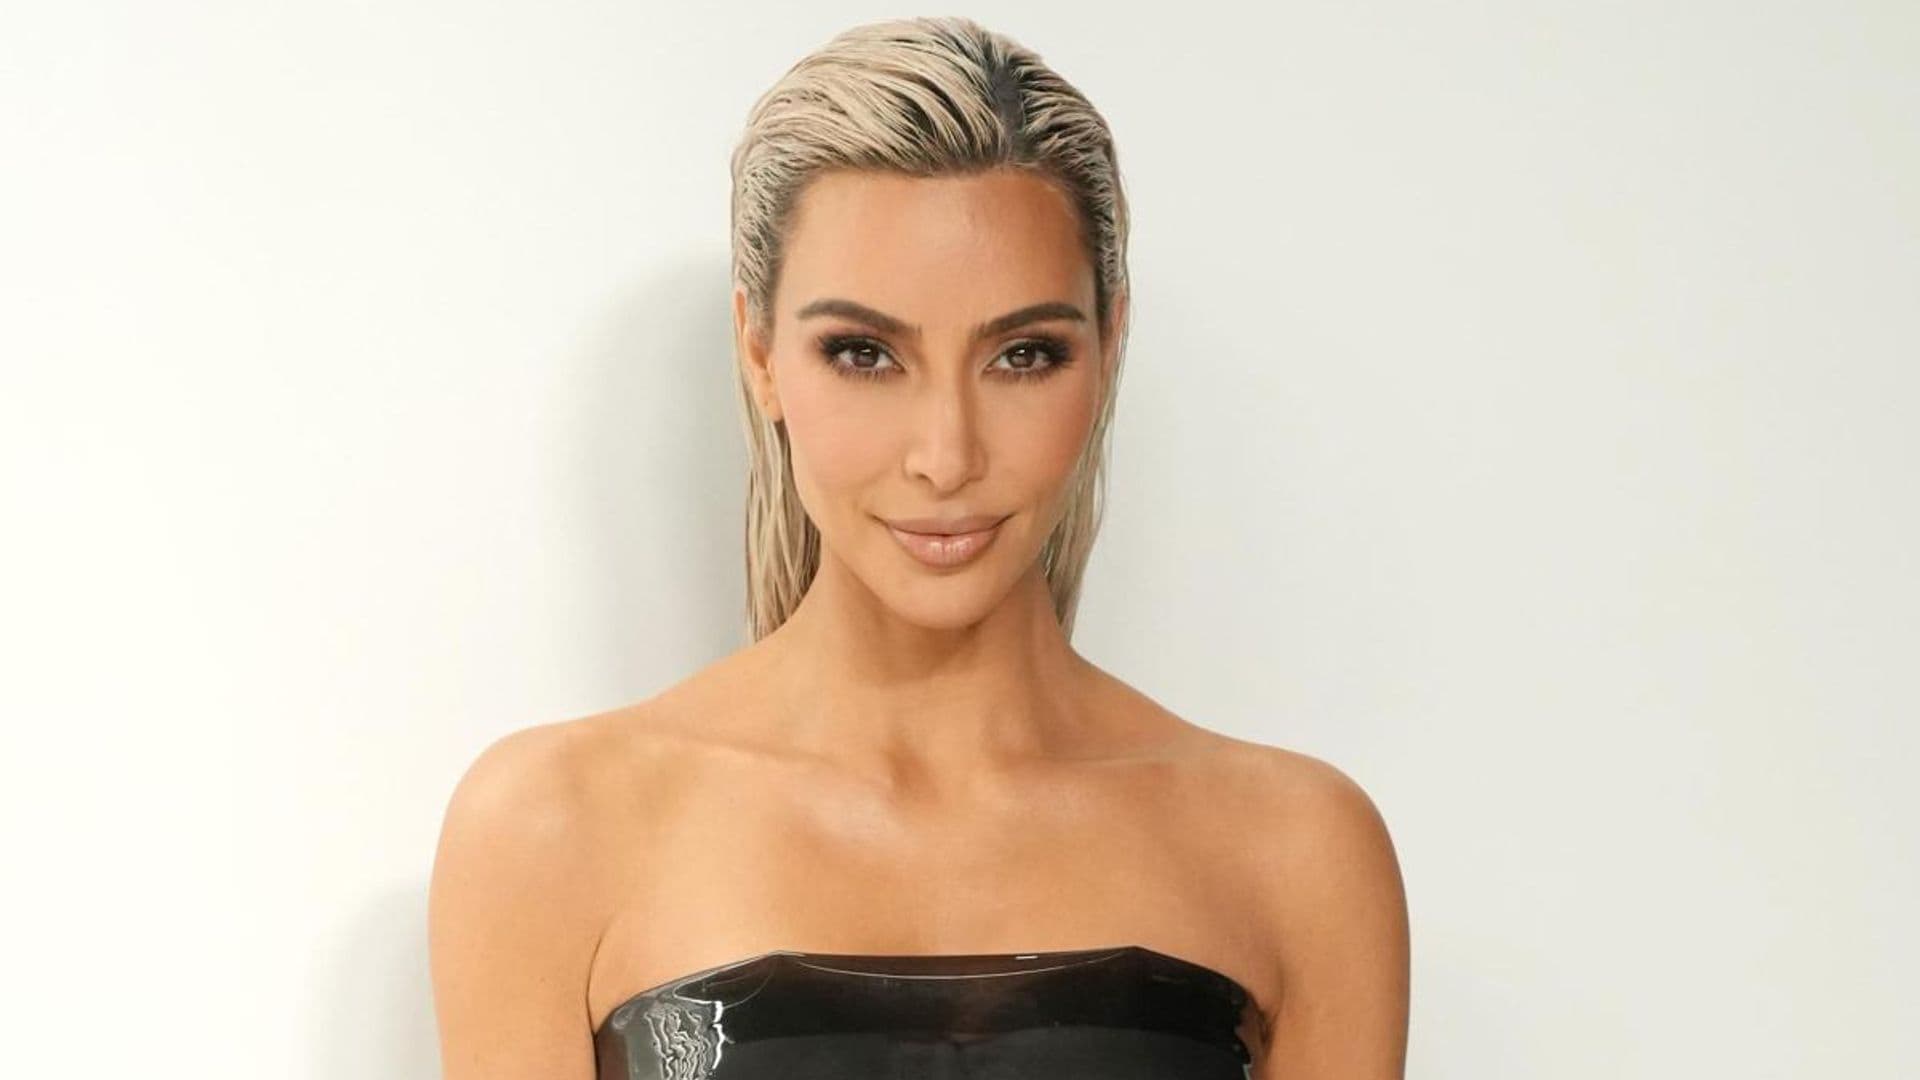 Kim Kardashian gets roasted after a Beyond Meat ad shows her “cooking” nuggies